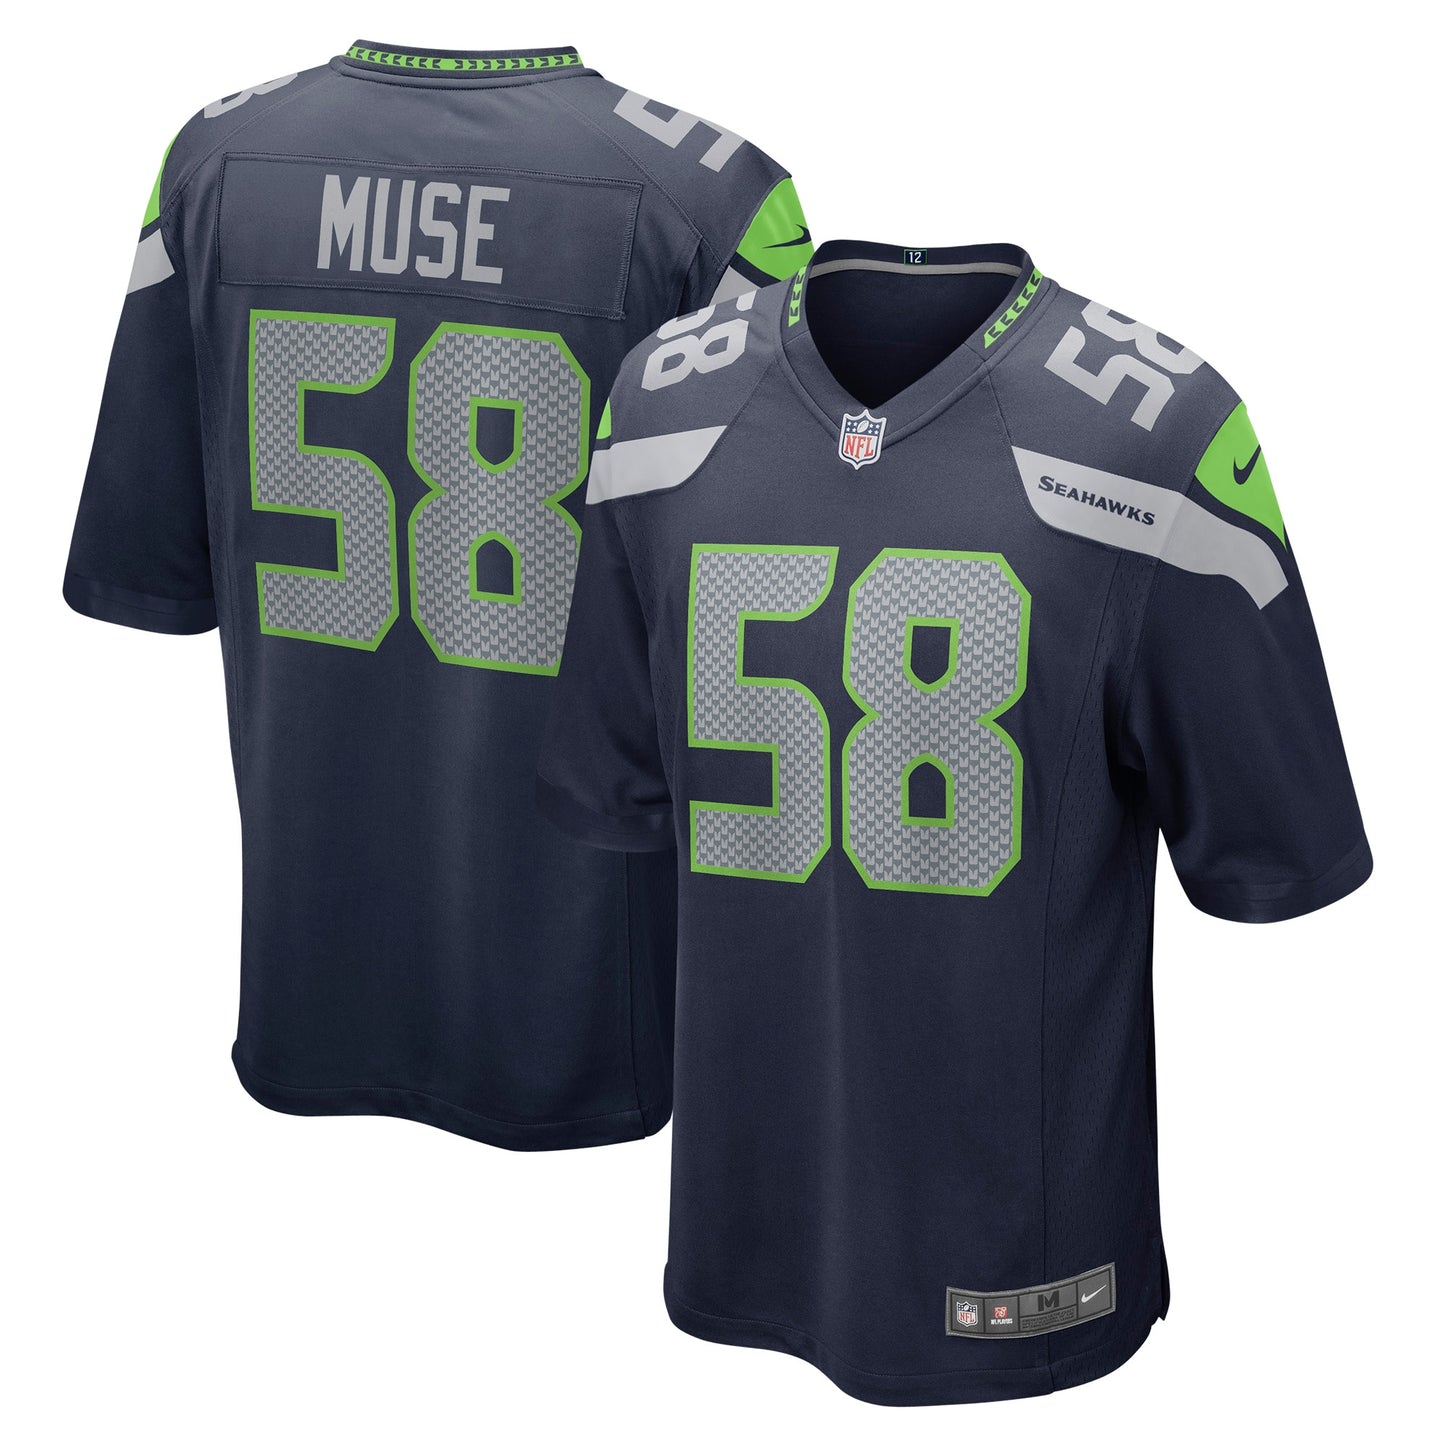 Tanner Muse Seattle Seahawks Nike Game Player Jersey - College Navy